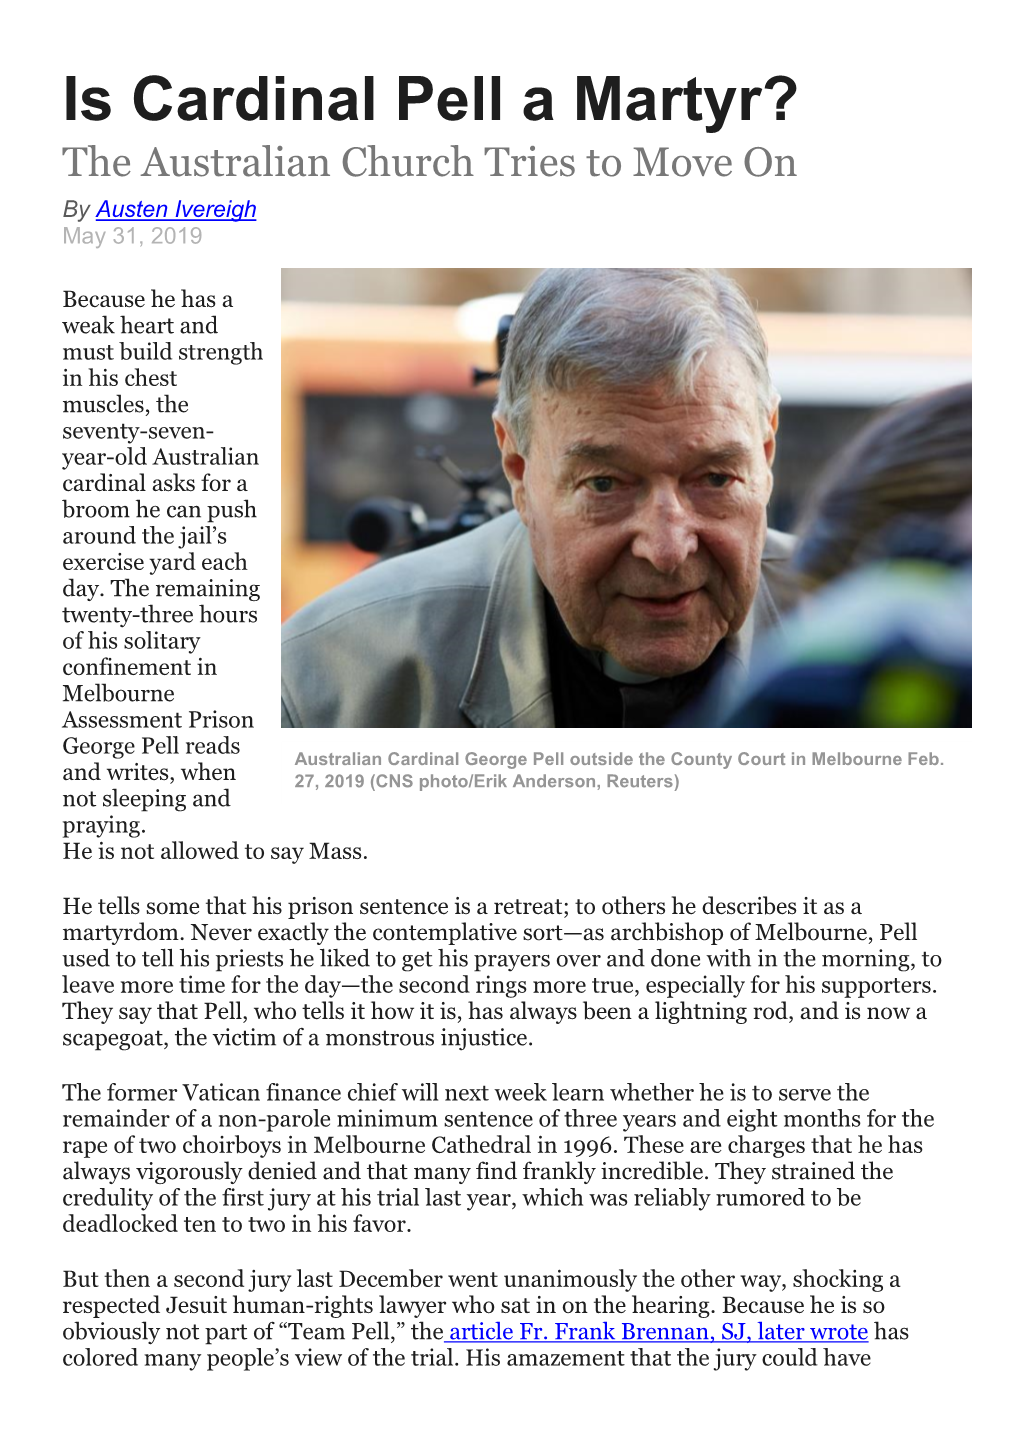 Is Cardinal Pell a Martyr? the Australian Church Tries to Move on by Austen Ivereigh May 31, 2019